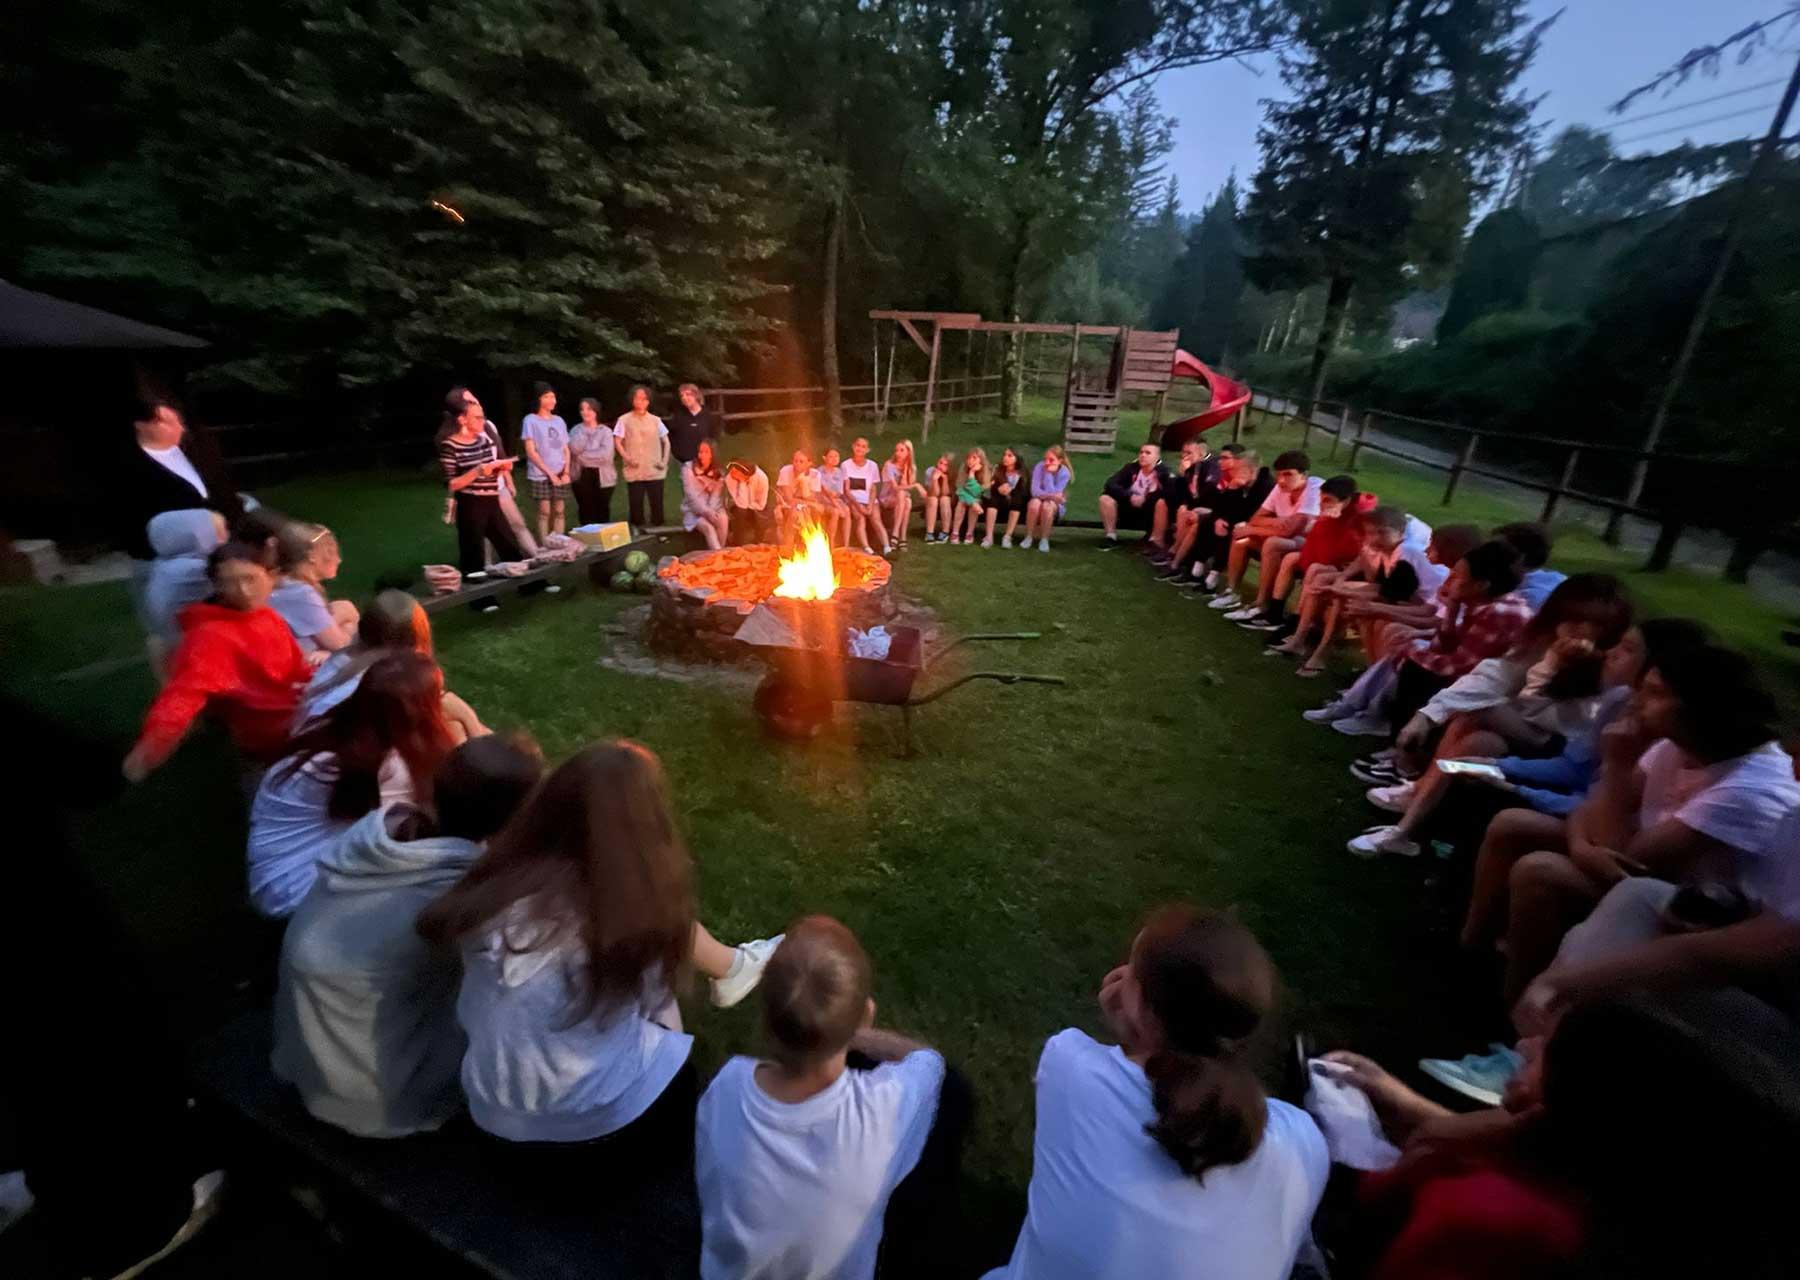 Teenagers around a campfire in the Wisla mountains. Older children in particular benefitted from the opportunity to spend time away from home and with peers . Photo: LWF Poland